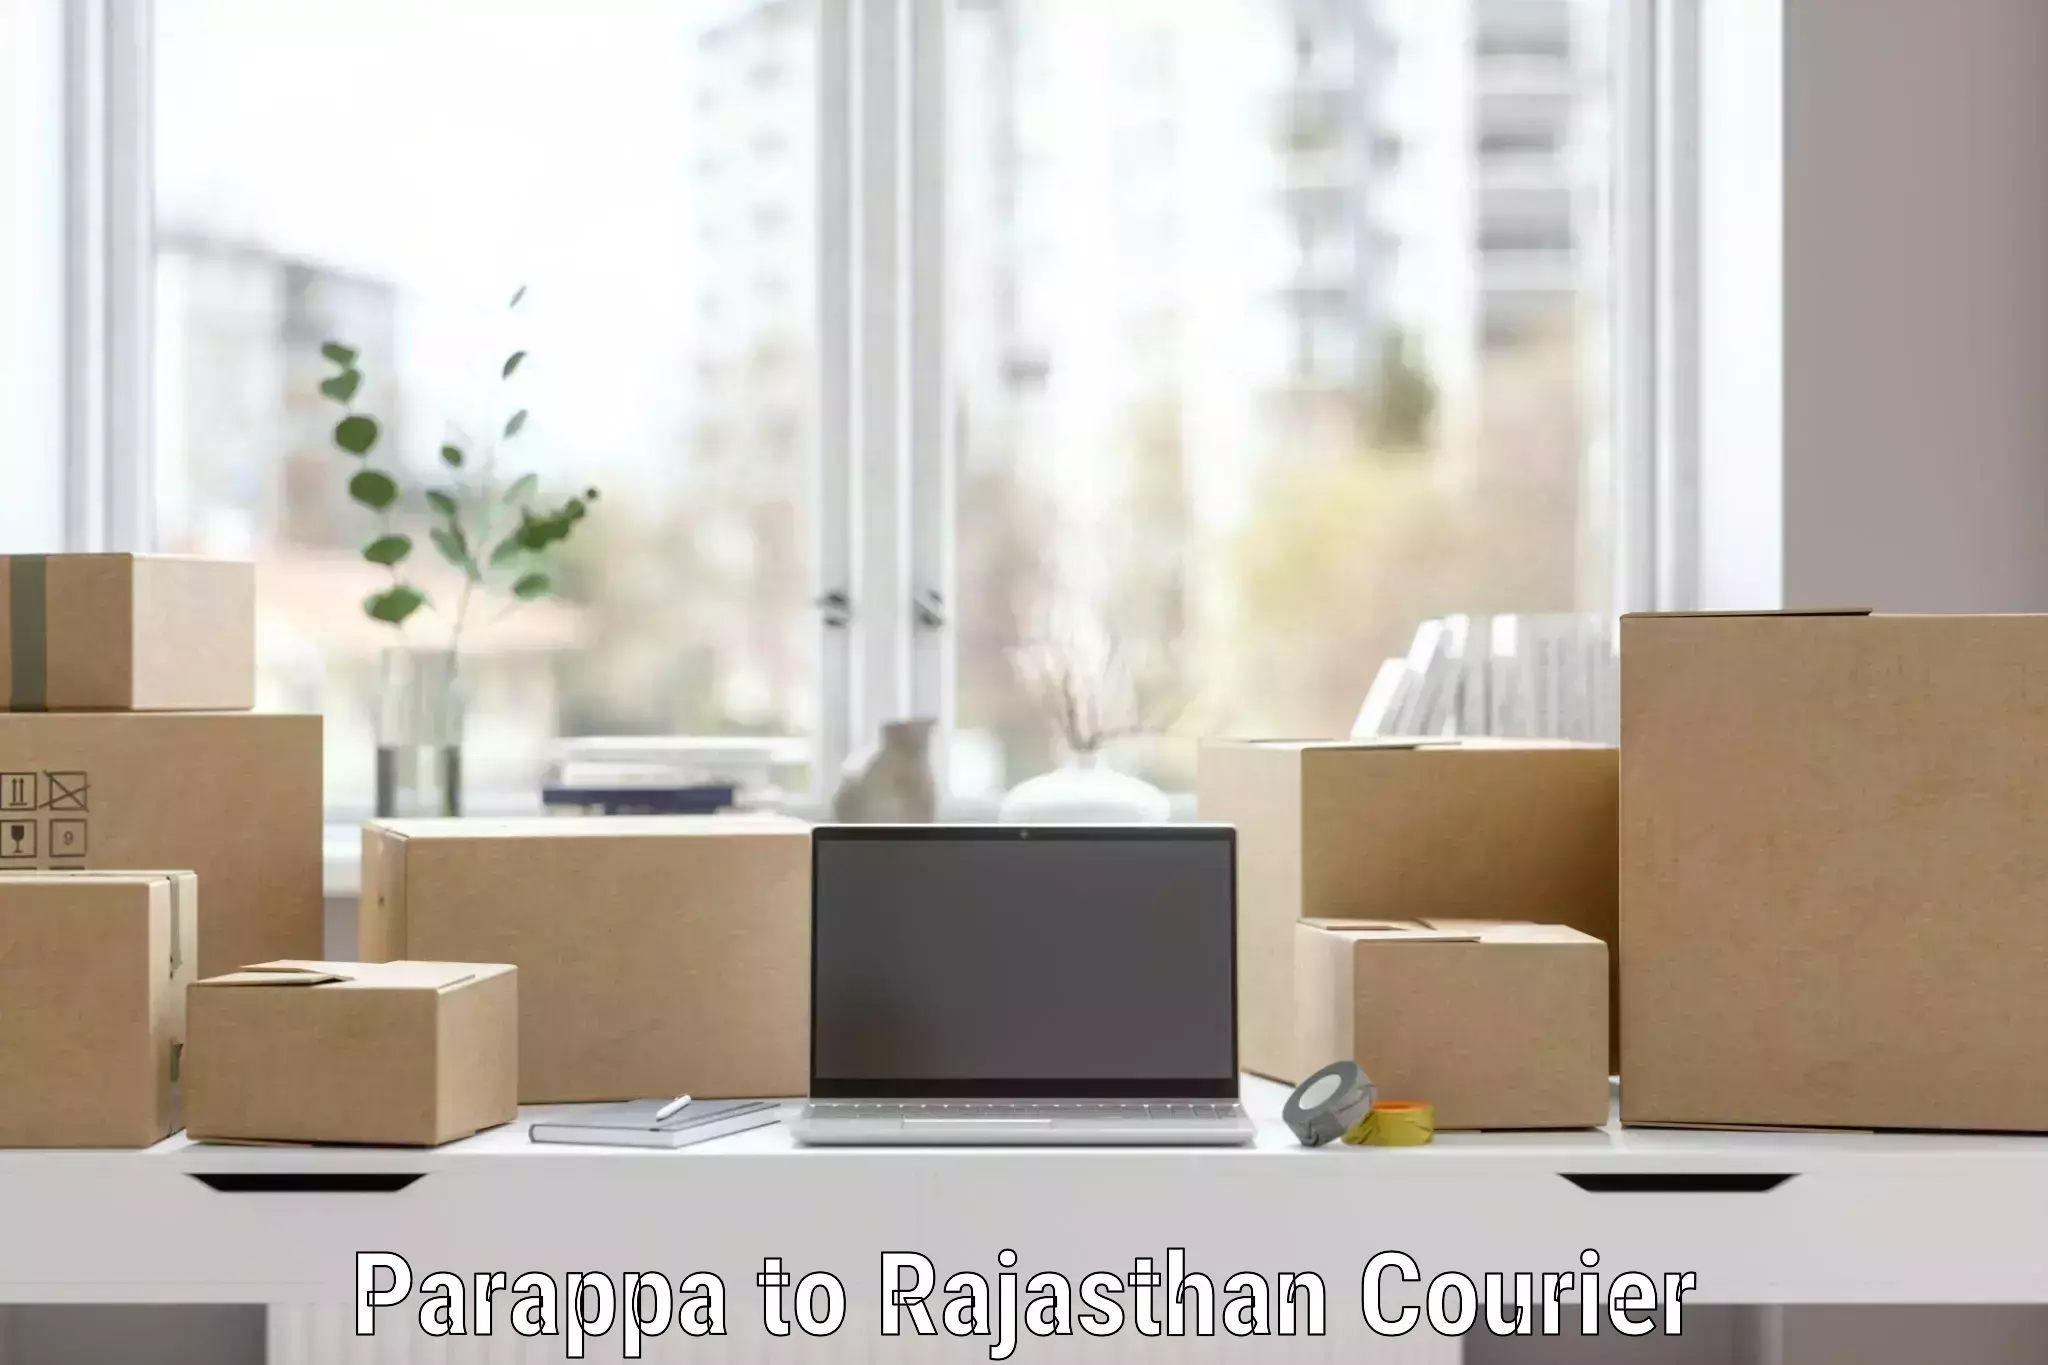 Furniture moving specialists Parappa to Hanumangarh